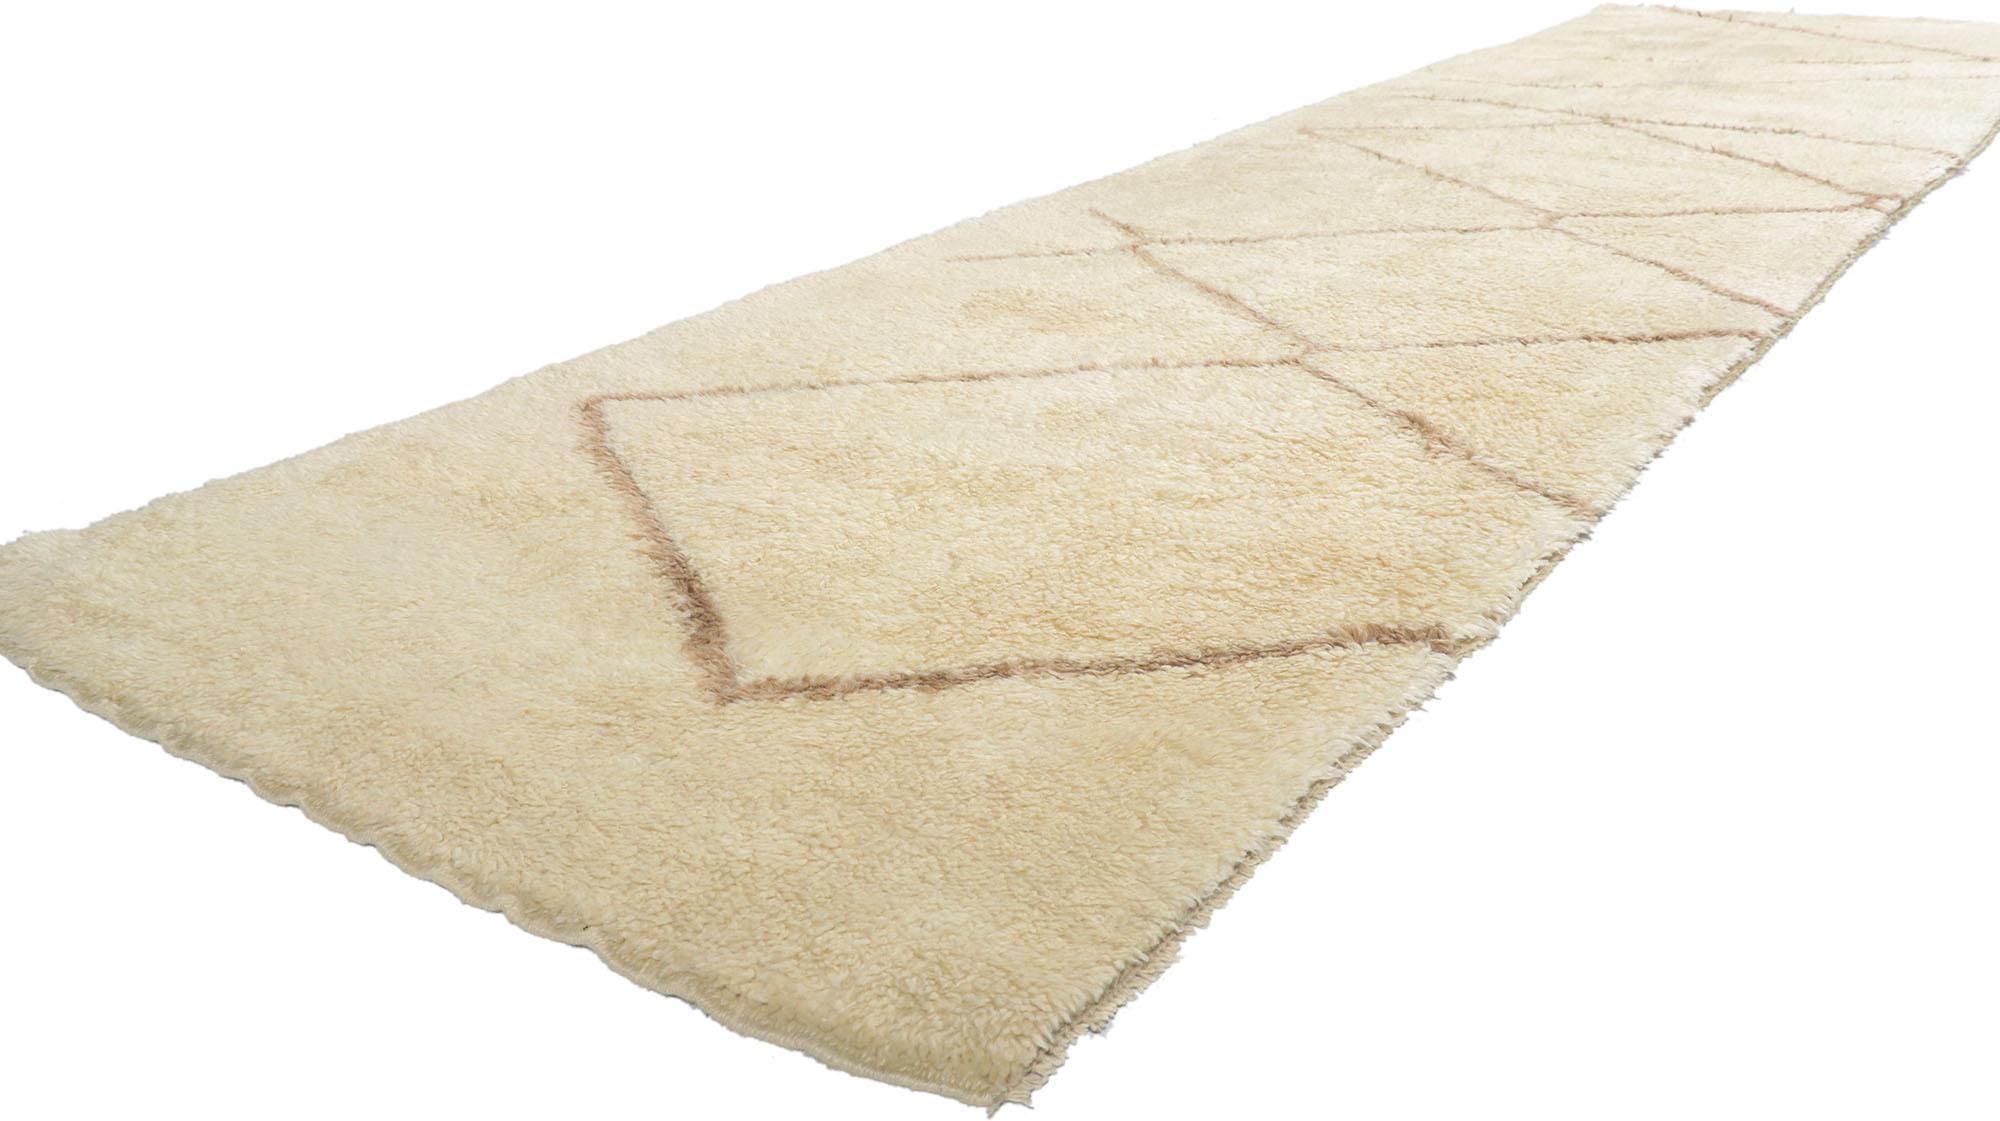 78286 Vintage Berber Moroccan Runner with Minimalist Style 03'04 x 13'00. With its simplicity, plush pile and minimalist style, this hand knotted wool vintage Berber Moroccan runner provides a feeling of cozy contentment without the clutter. The